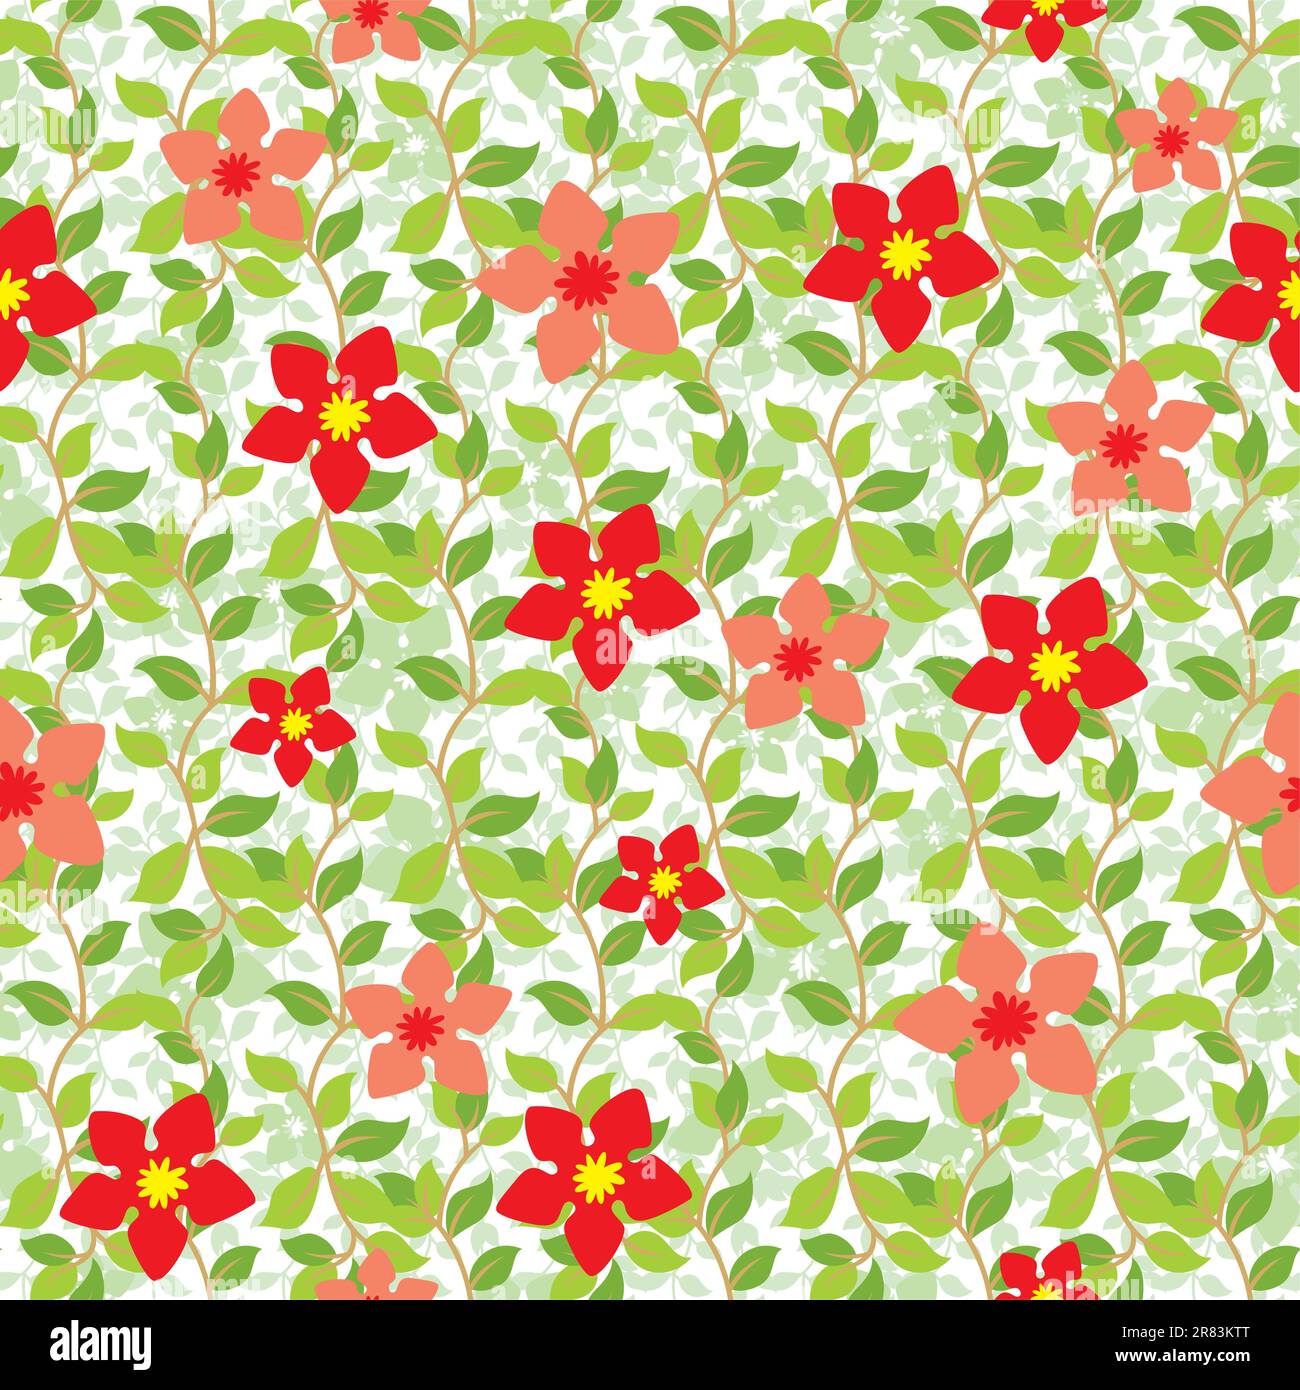 Seamless background from a floral ornament, Fashionable modern wallpaper or textile Stock Vector